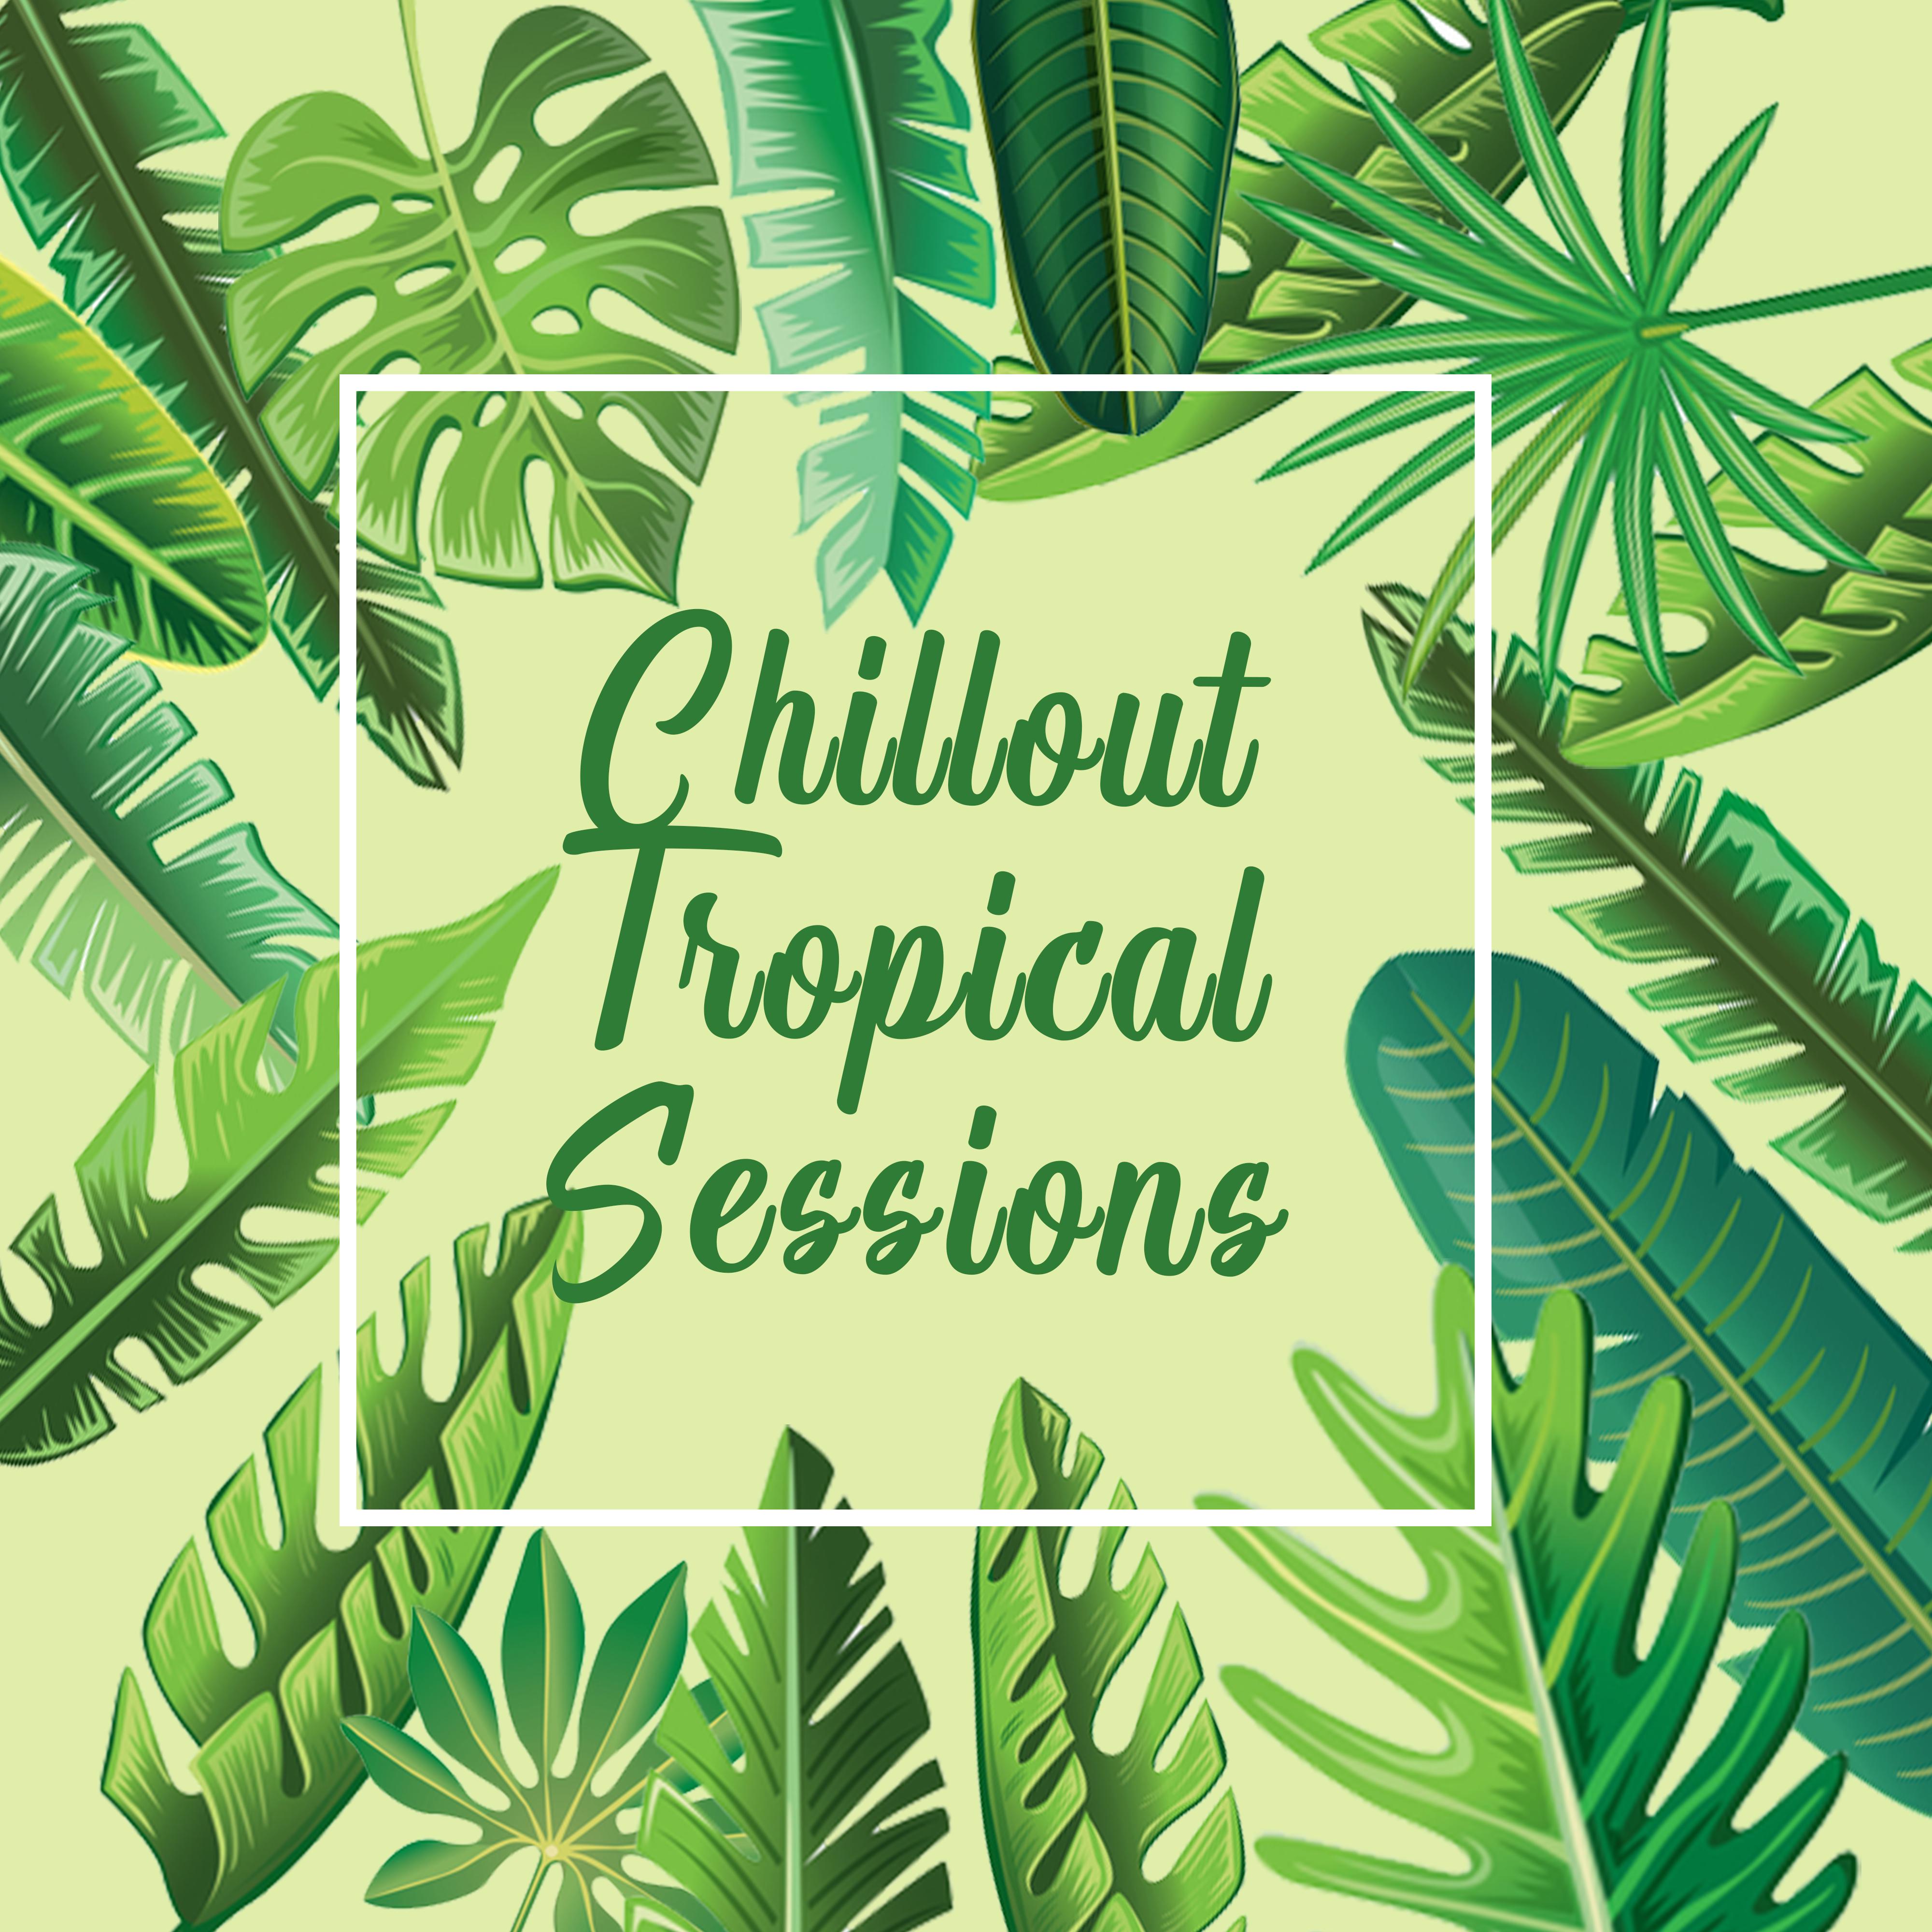 Chillout Tropical Sessions